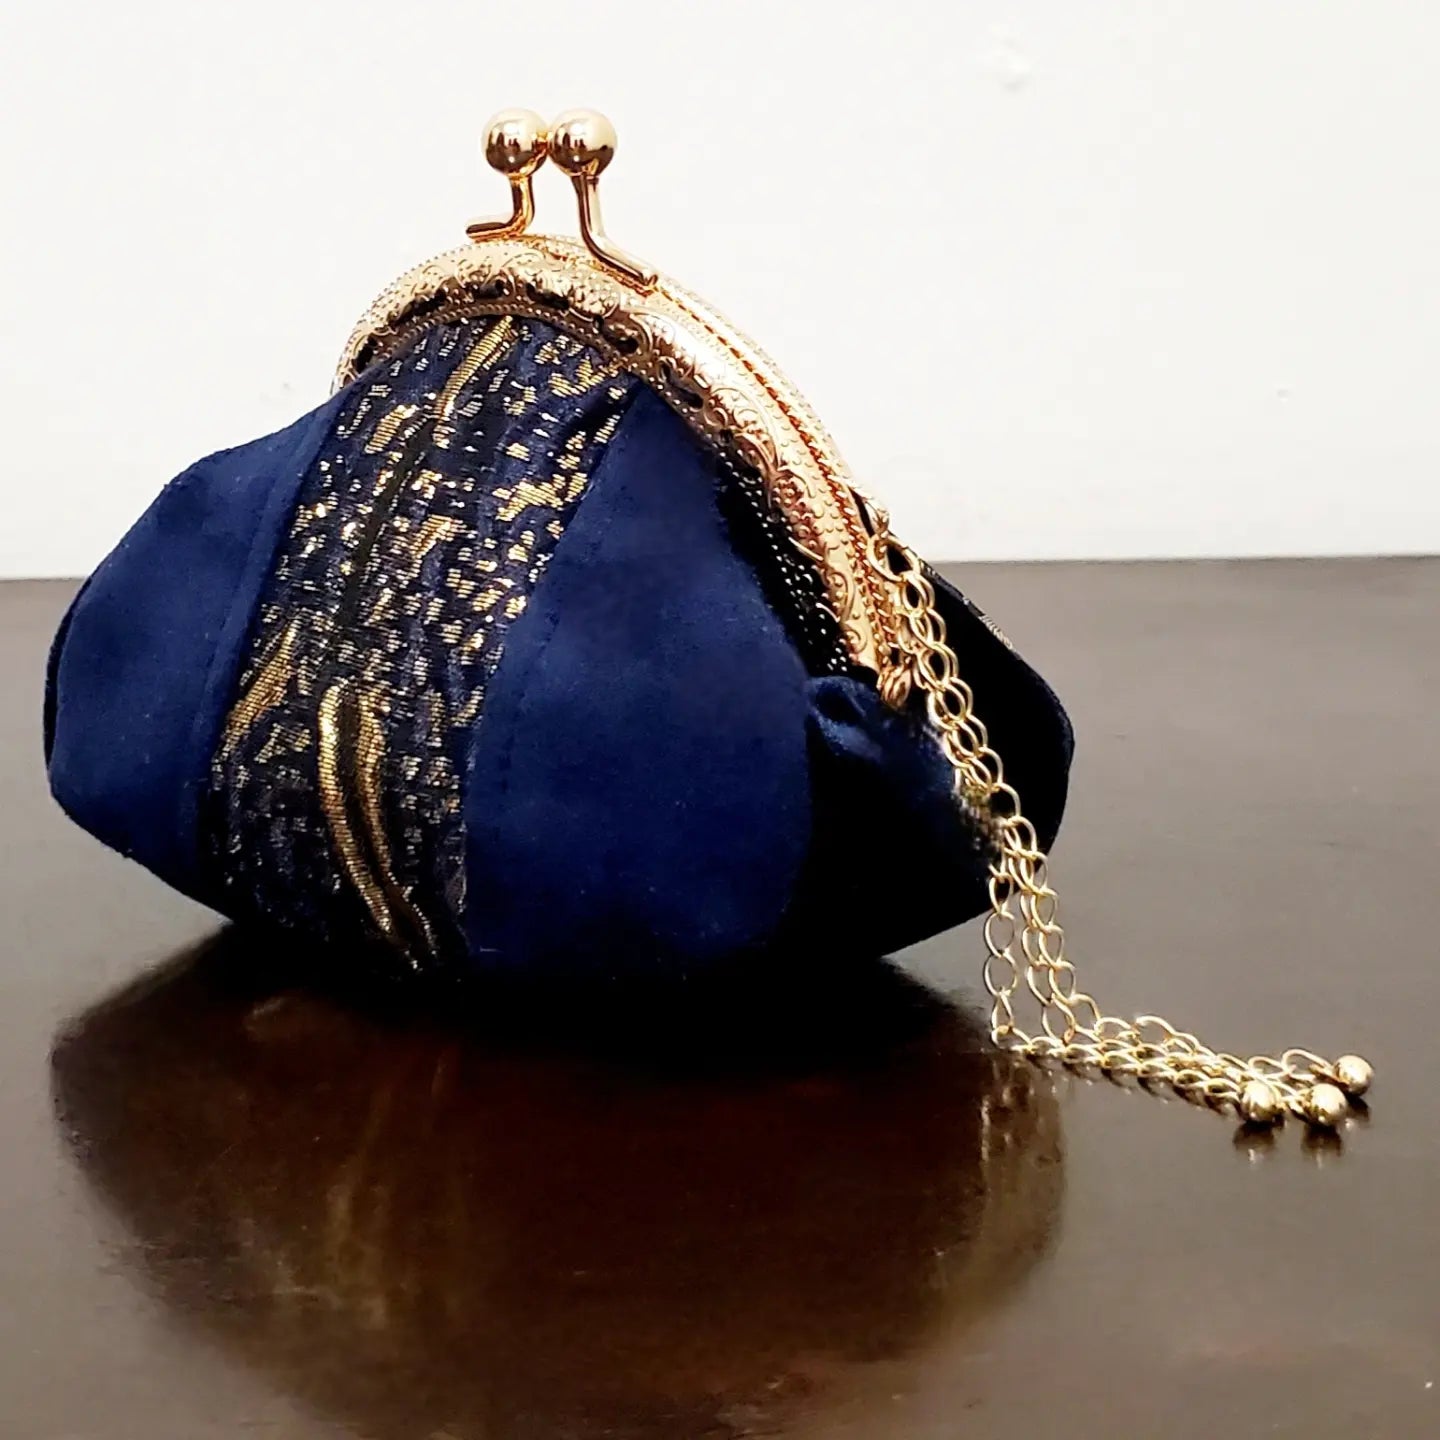 side view of Blue and gold kiss clasp coin purse with gold tassel